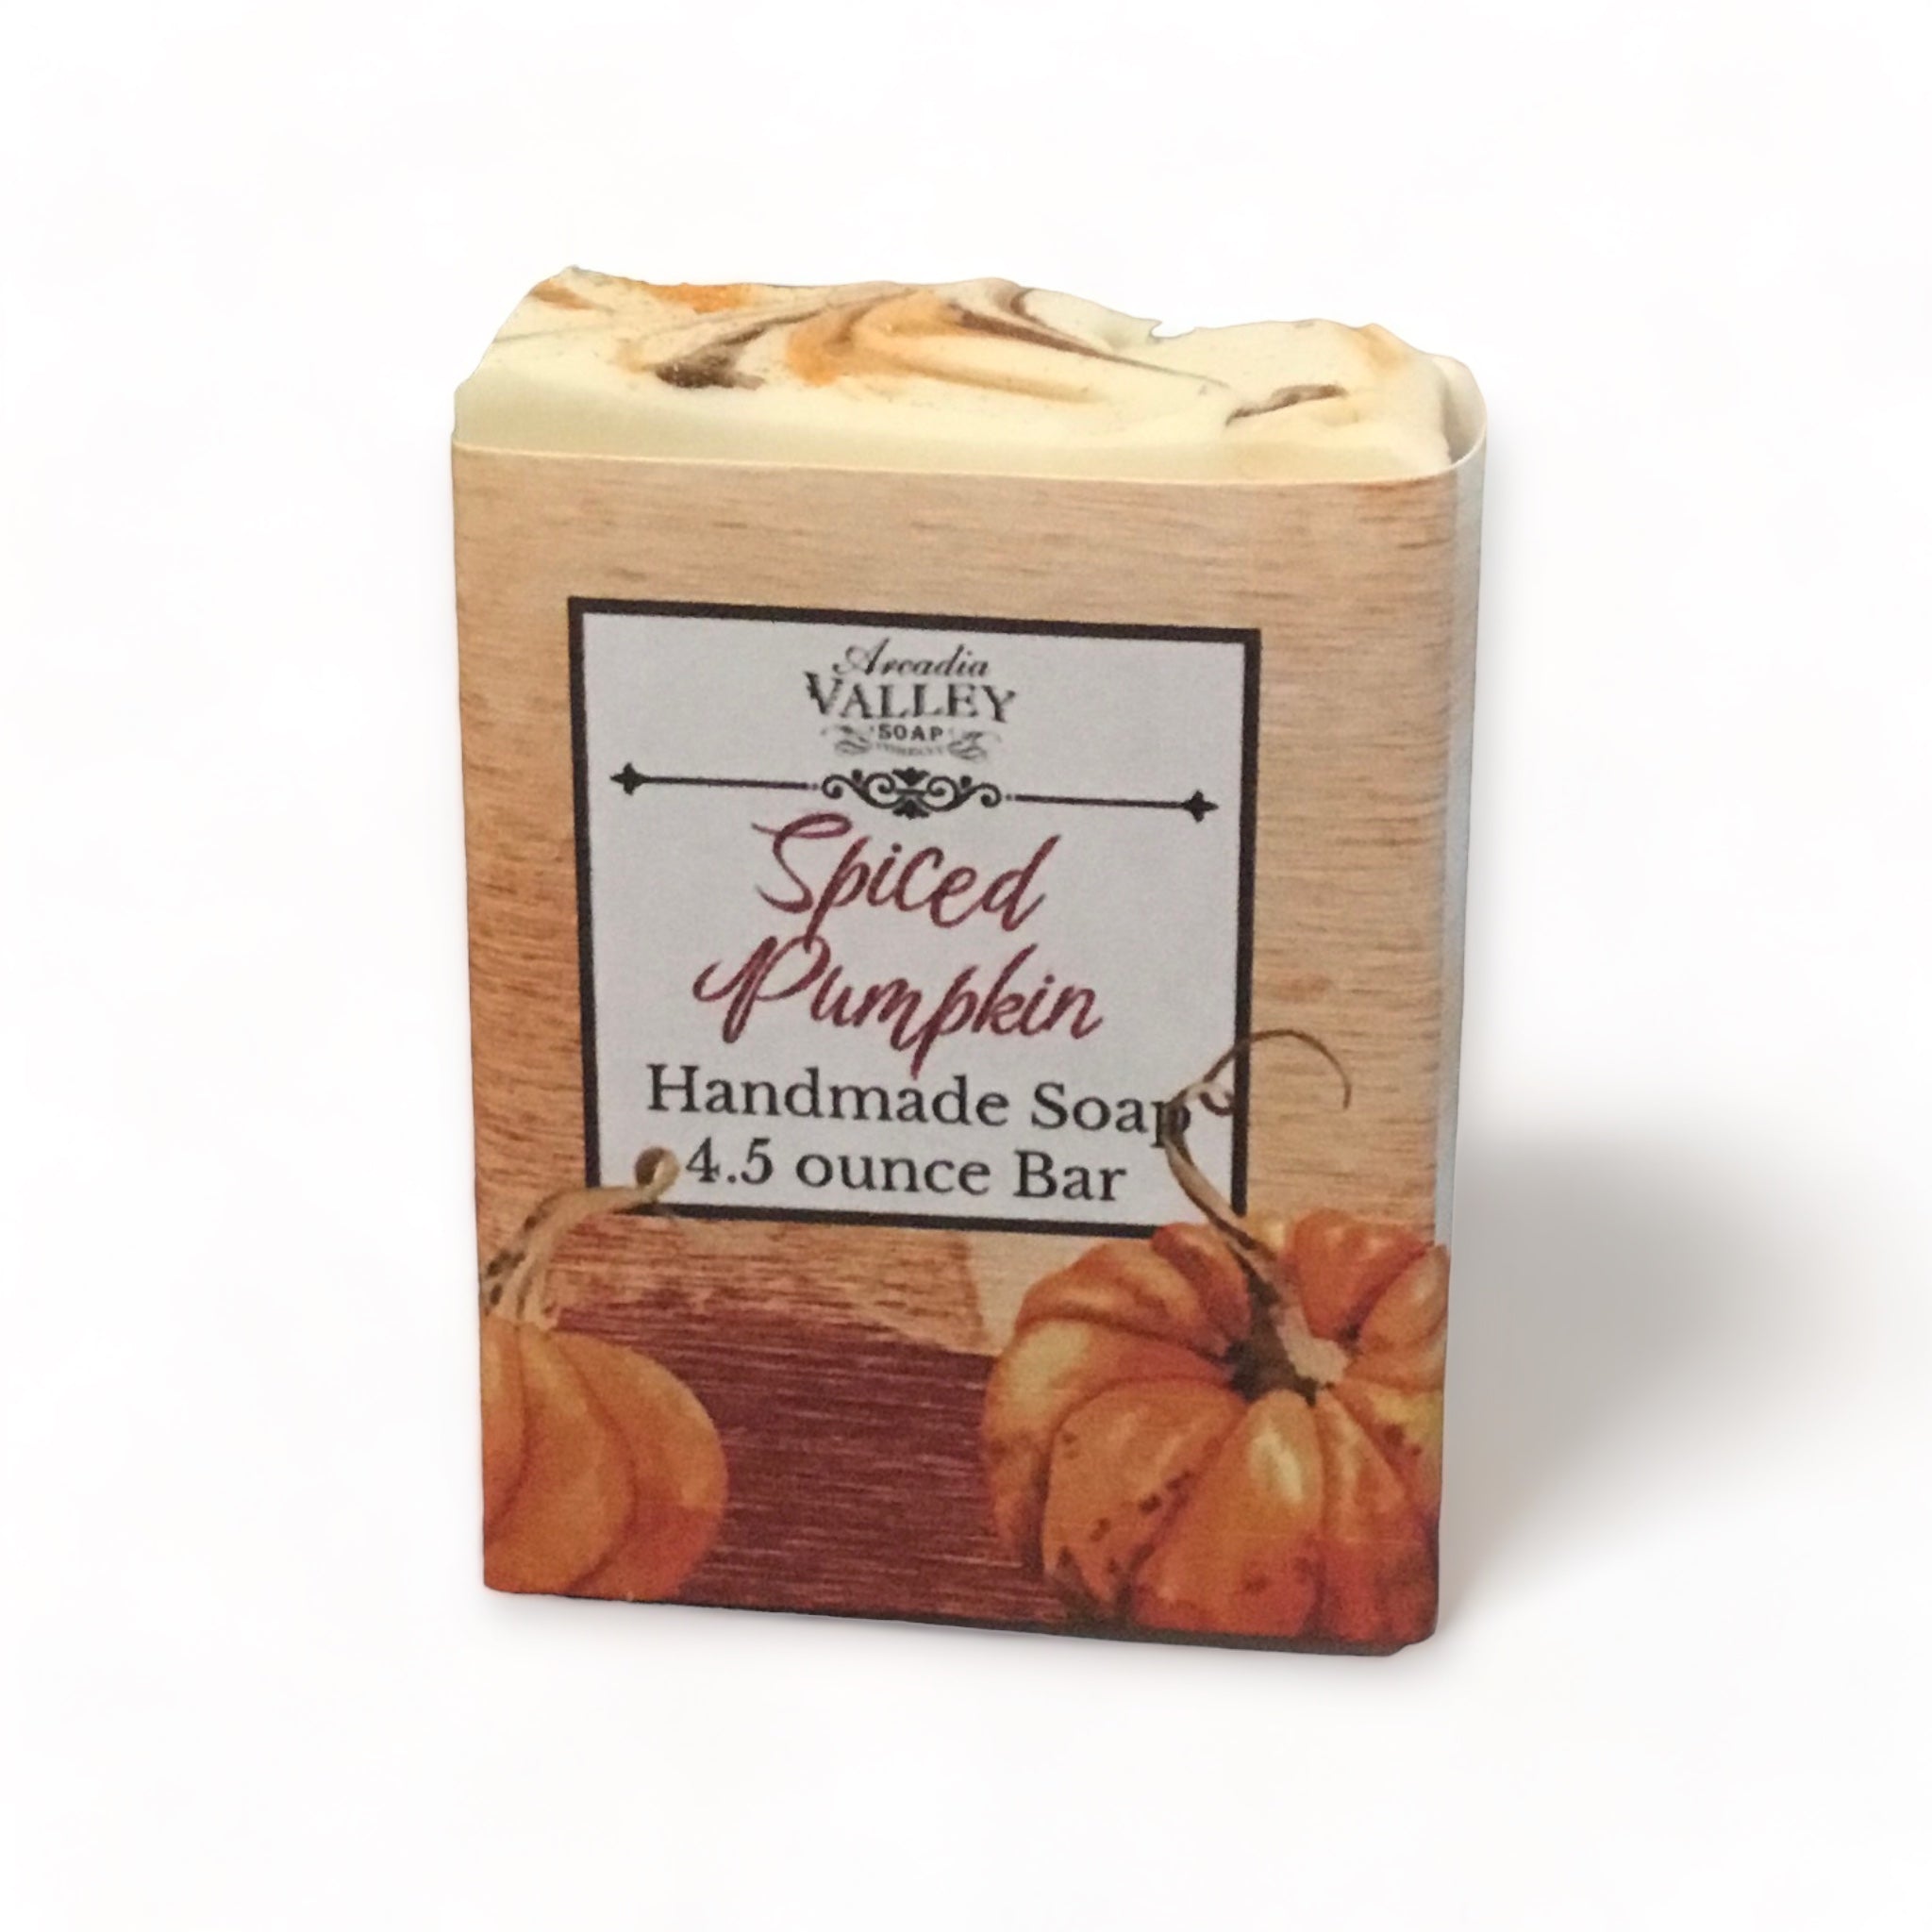 Spiced Pumpkin soap with decorative paper wrapper on a white background